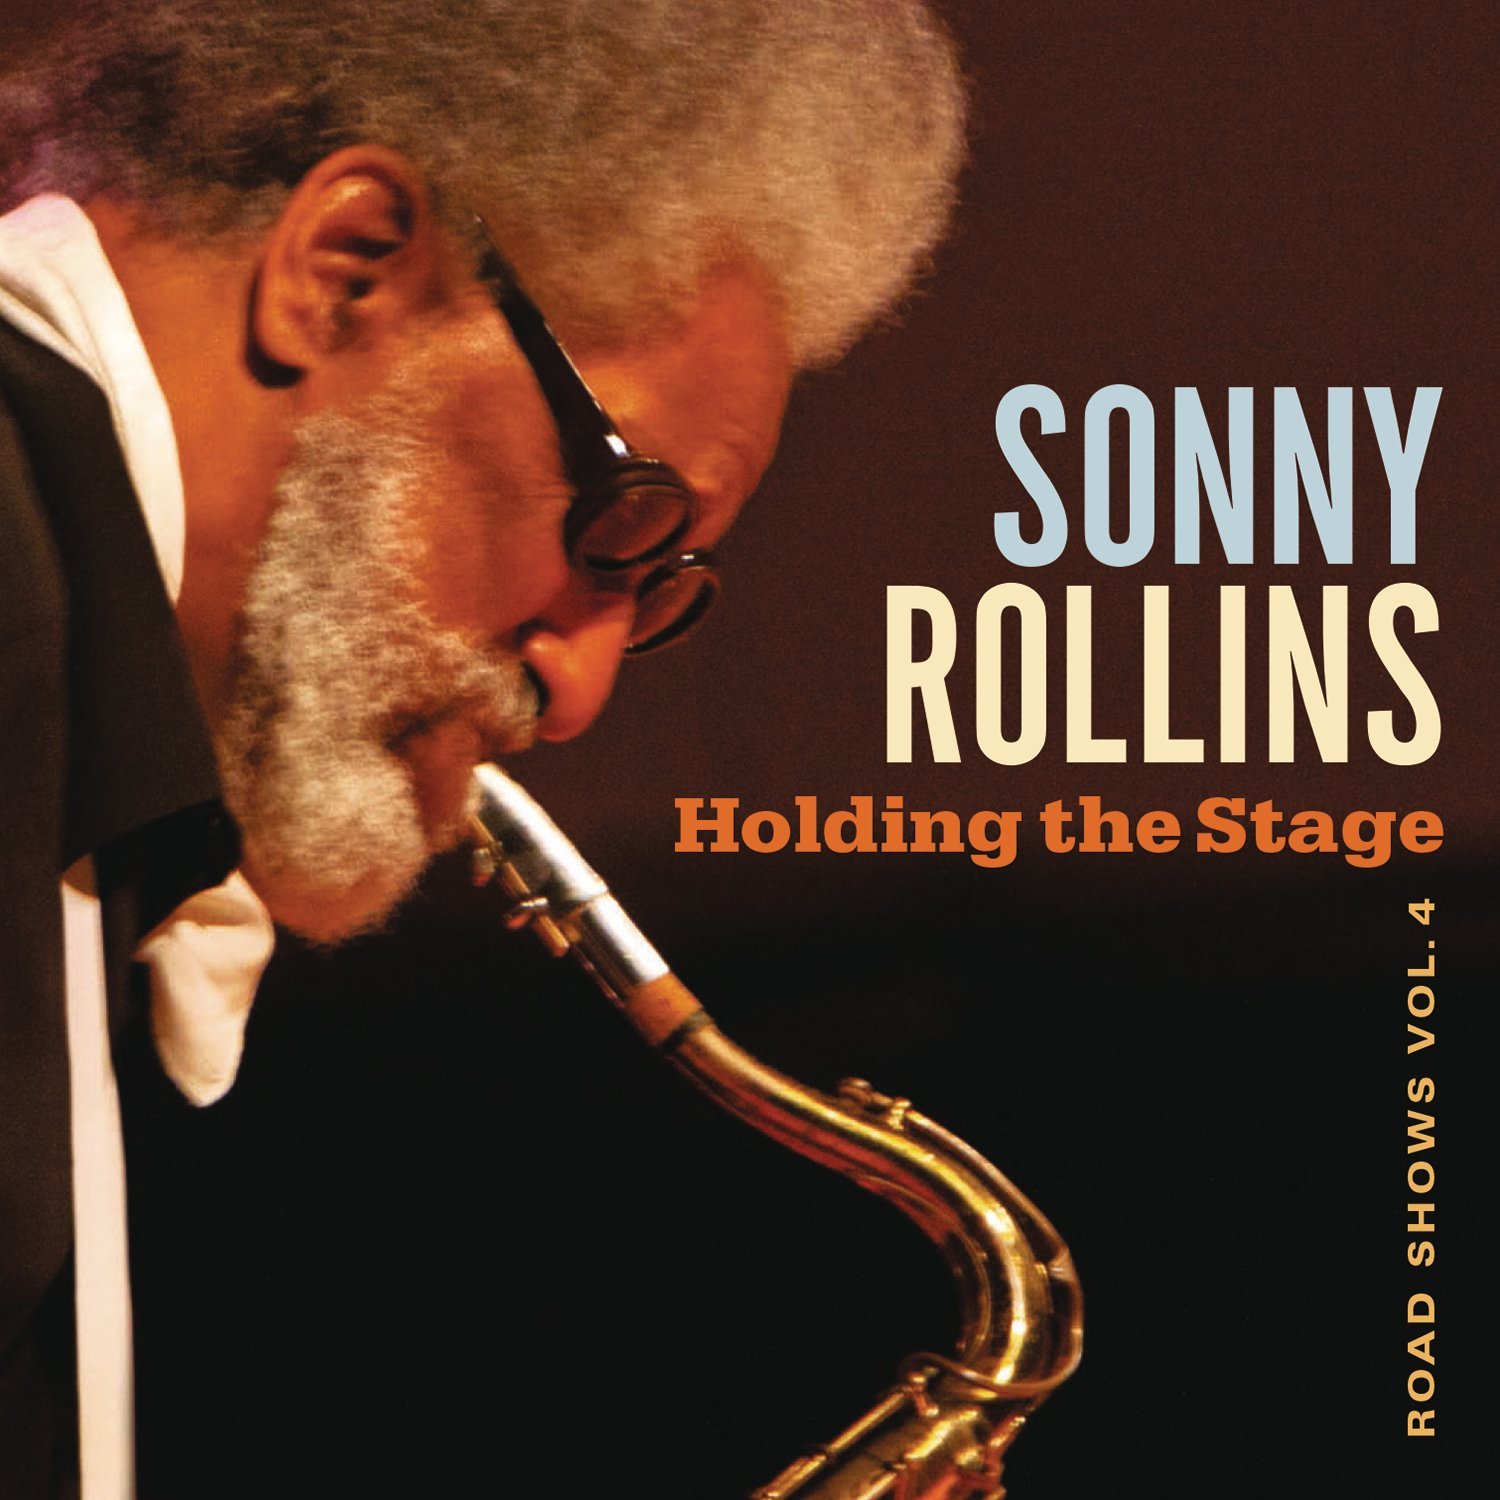 Sony Music Holding the stage - road shows - vol 4 | sonny rollins